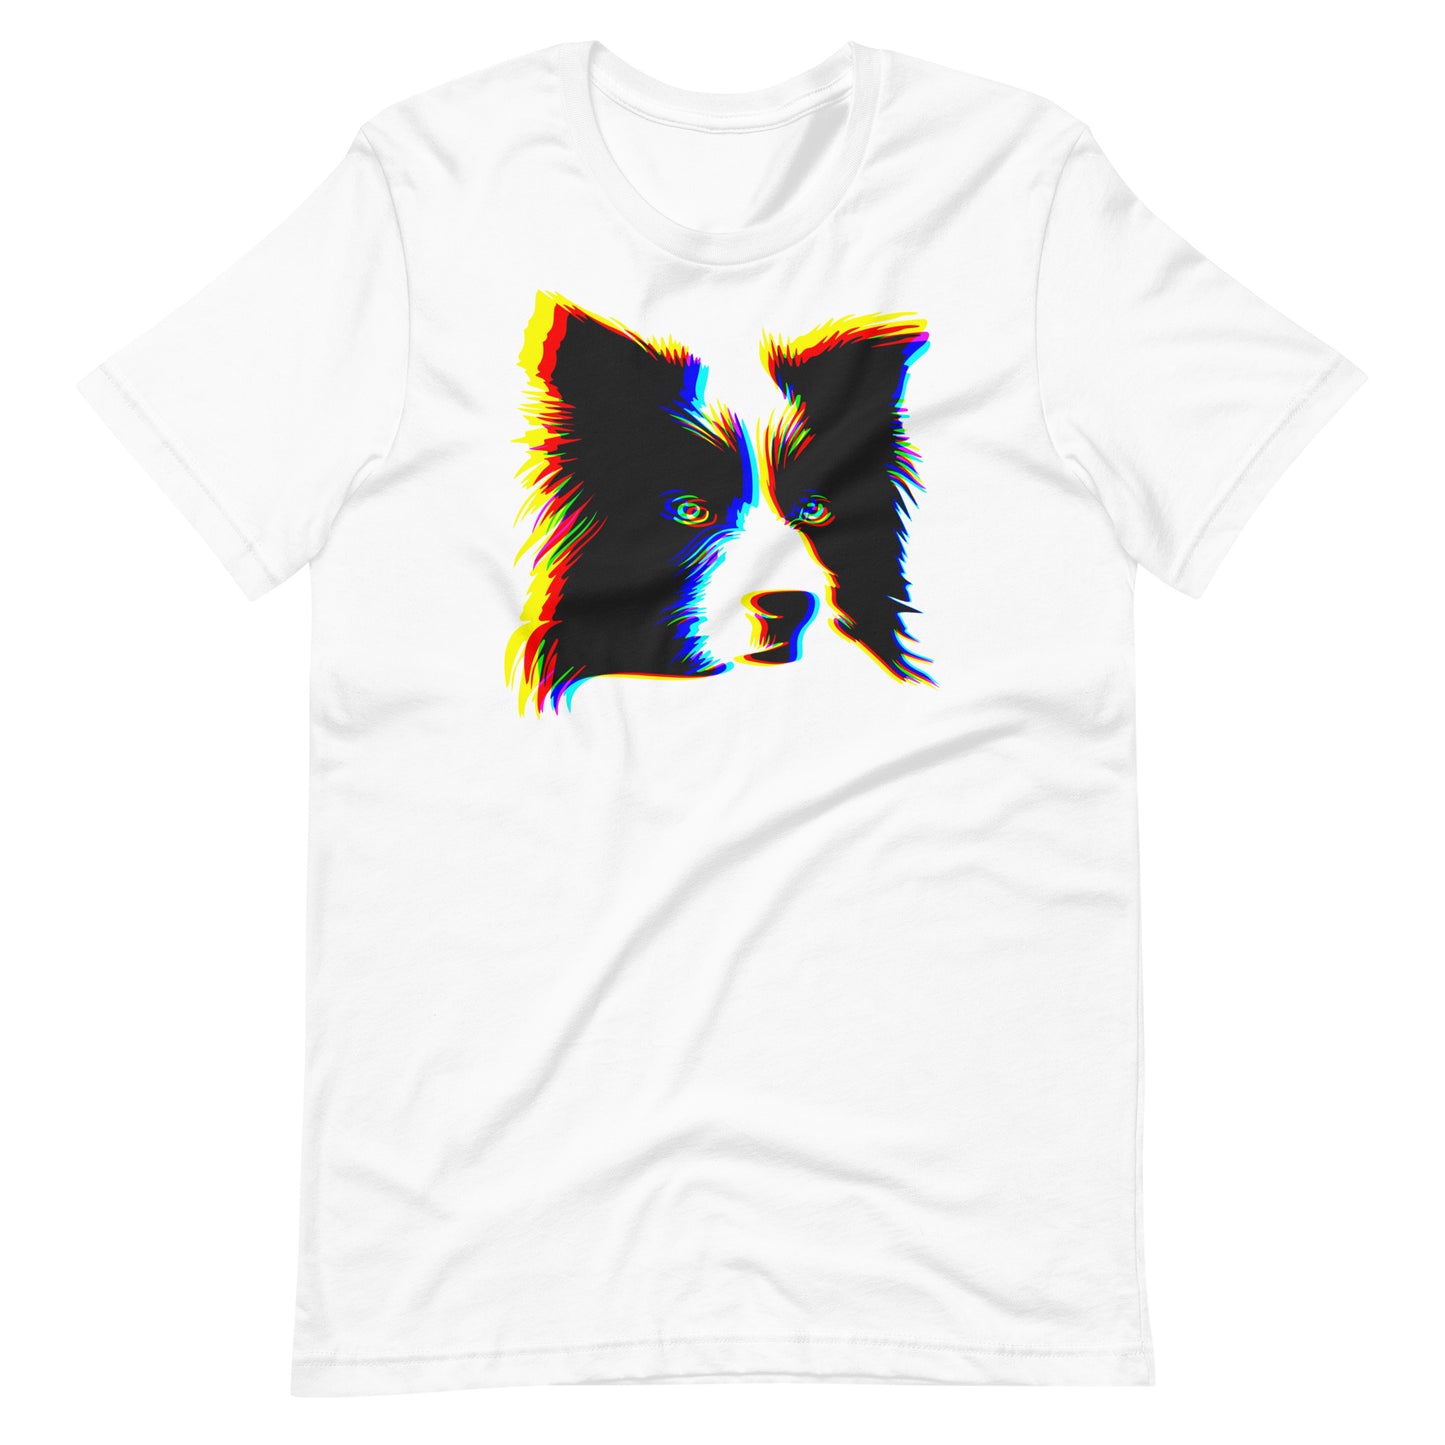 Anaglyph Border Collie face on unisex white t-shirt